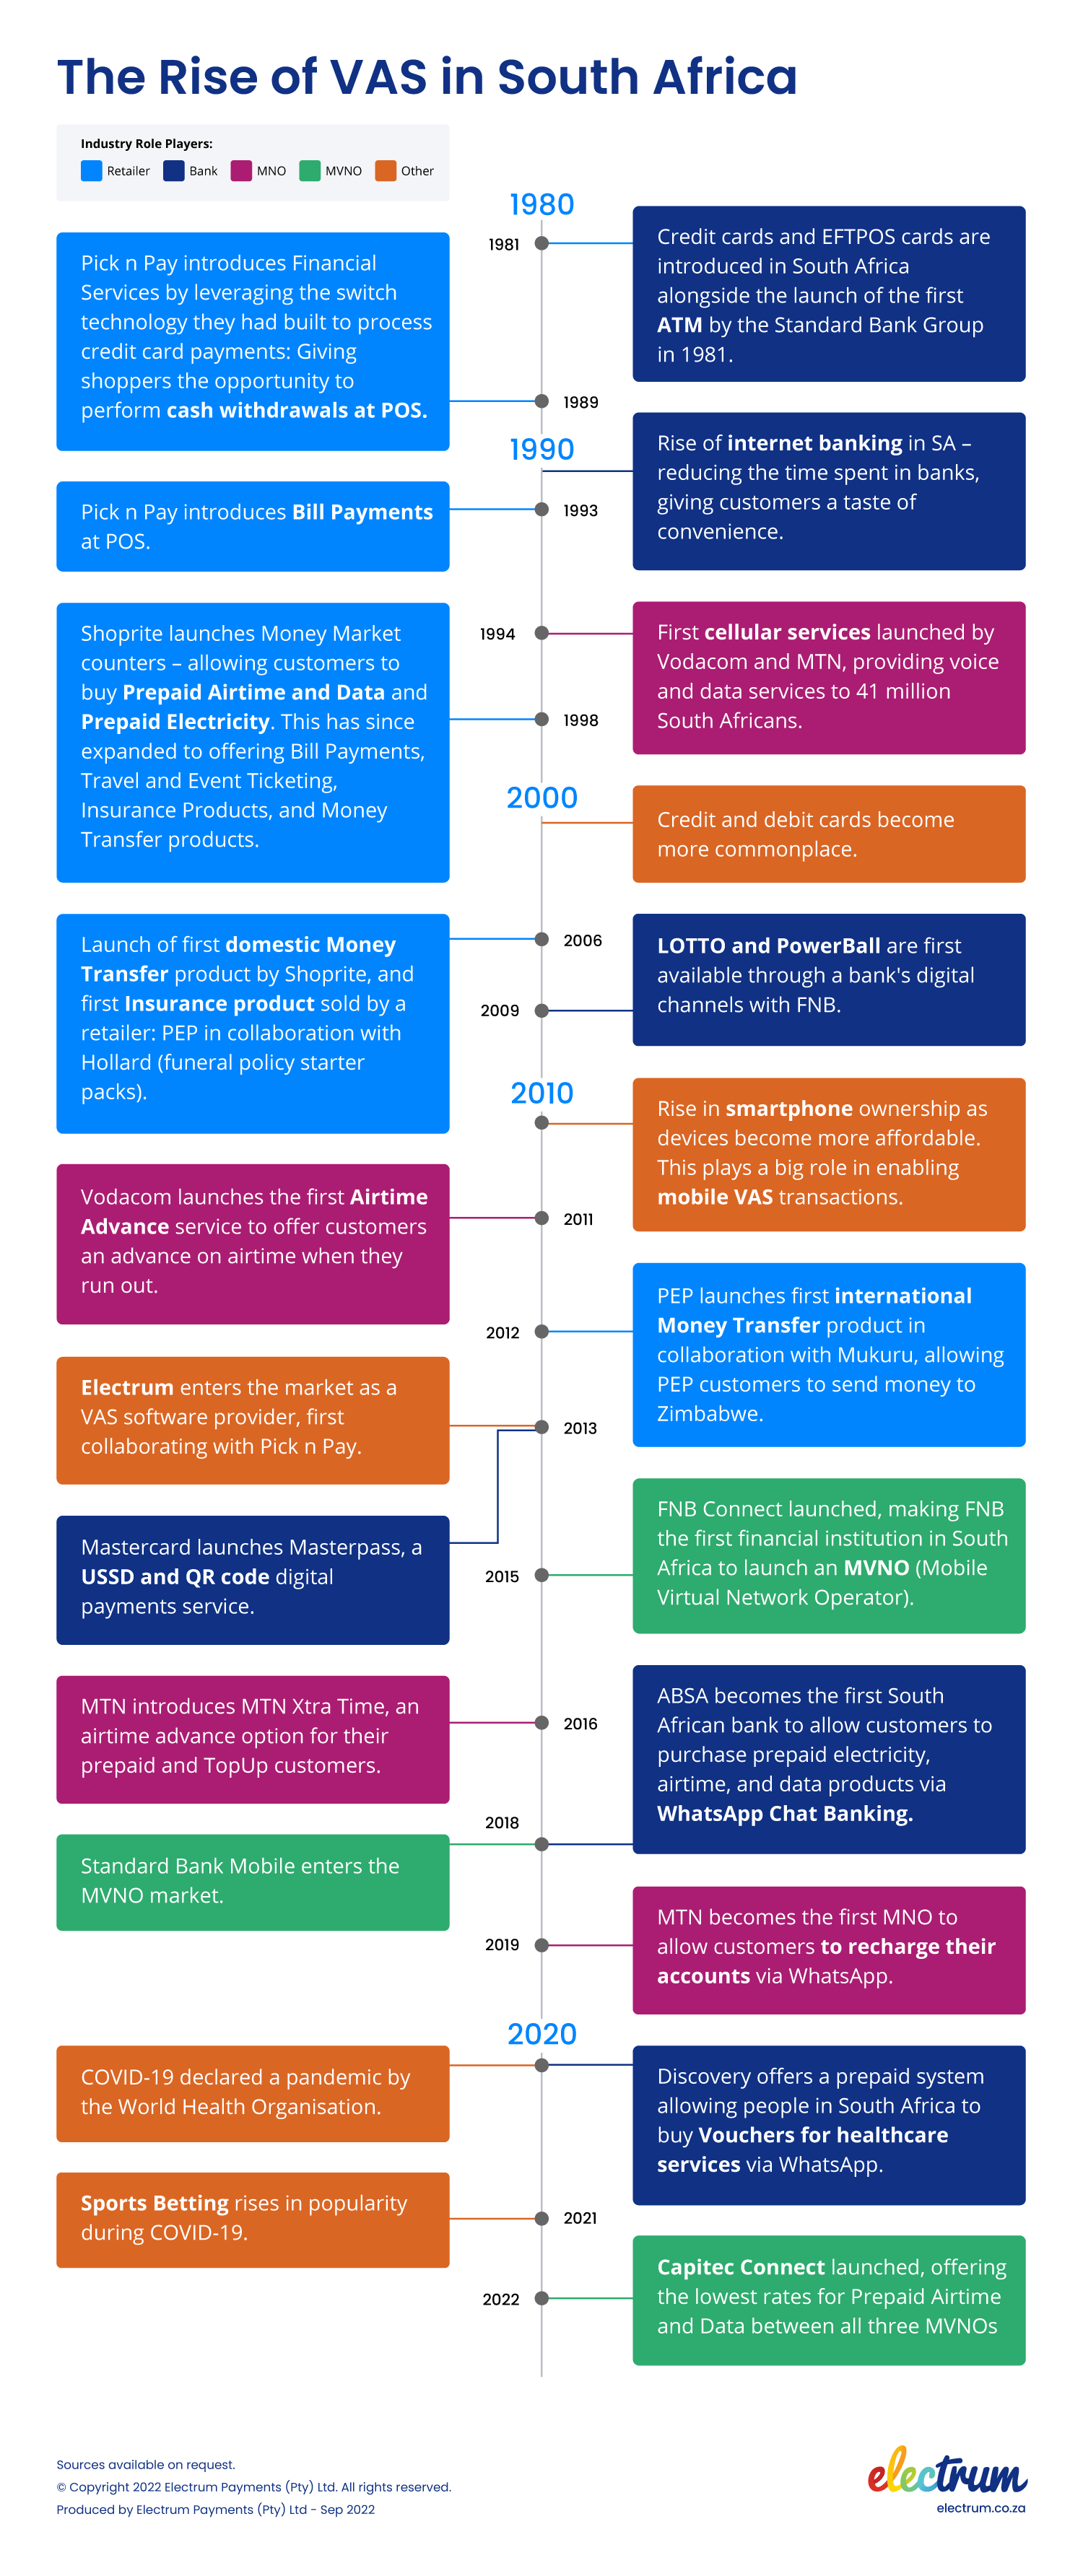 A timeline of notable events in the rise of value-added services in South Africa, starting in 1980 and ending in 2022